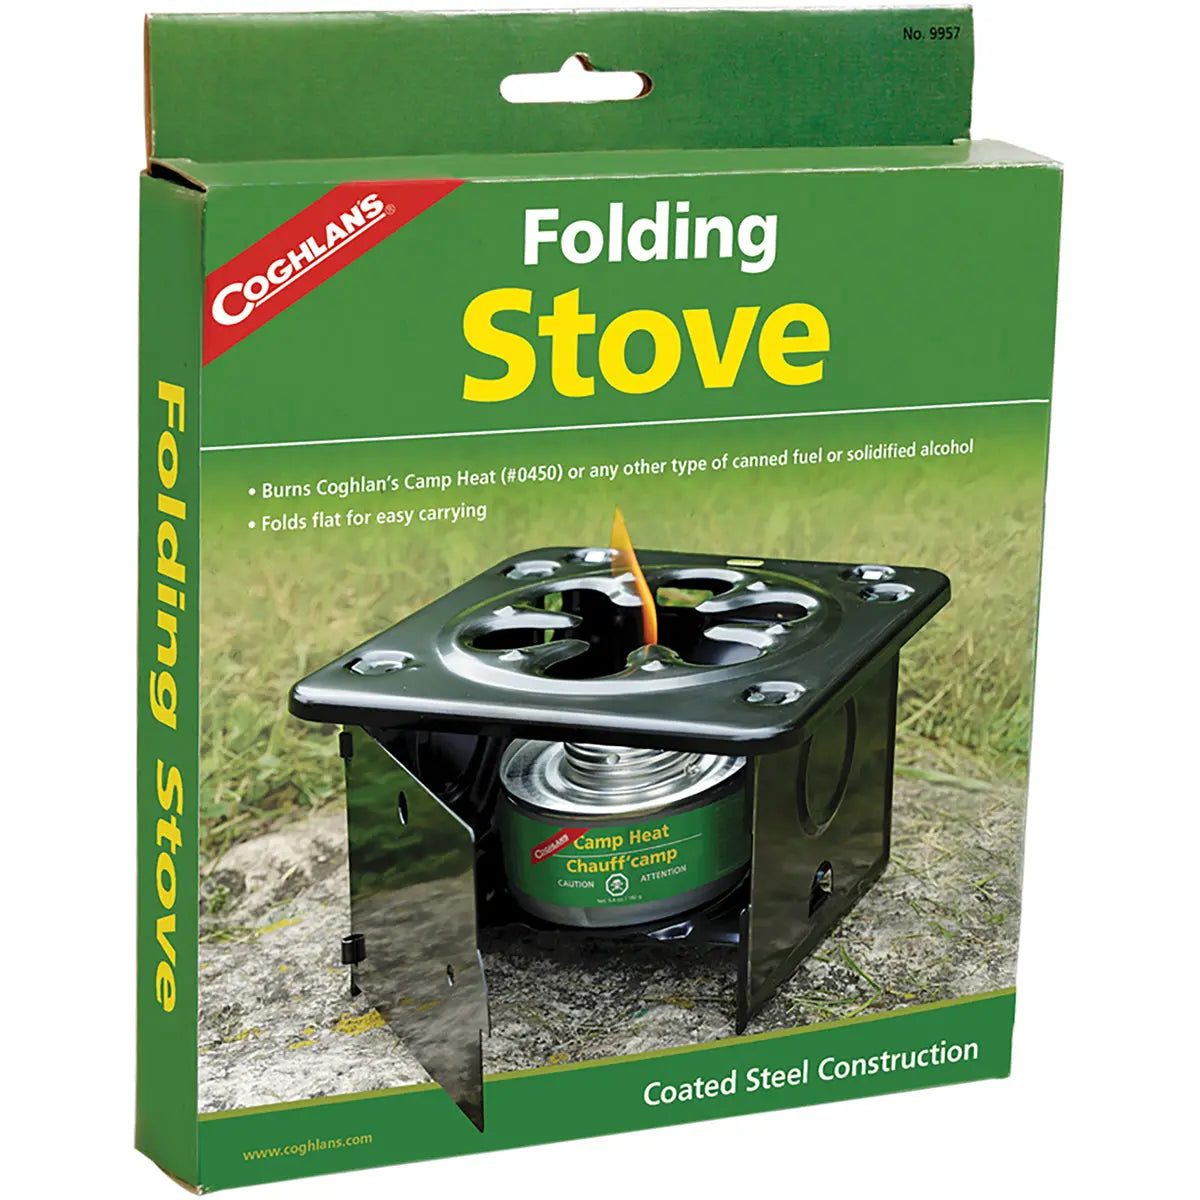 Coghlan's Folding Stove, Burns Camp Heat, Canned Fuel, or Solidified Alcohol Coghlan's